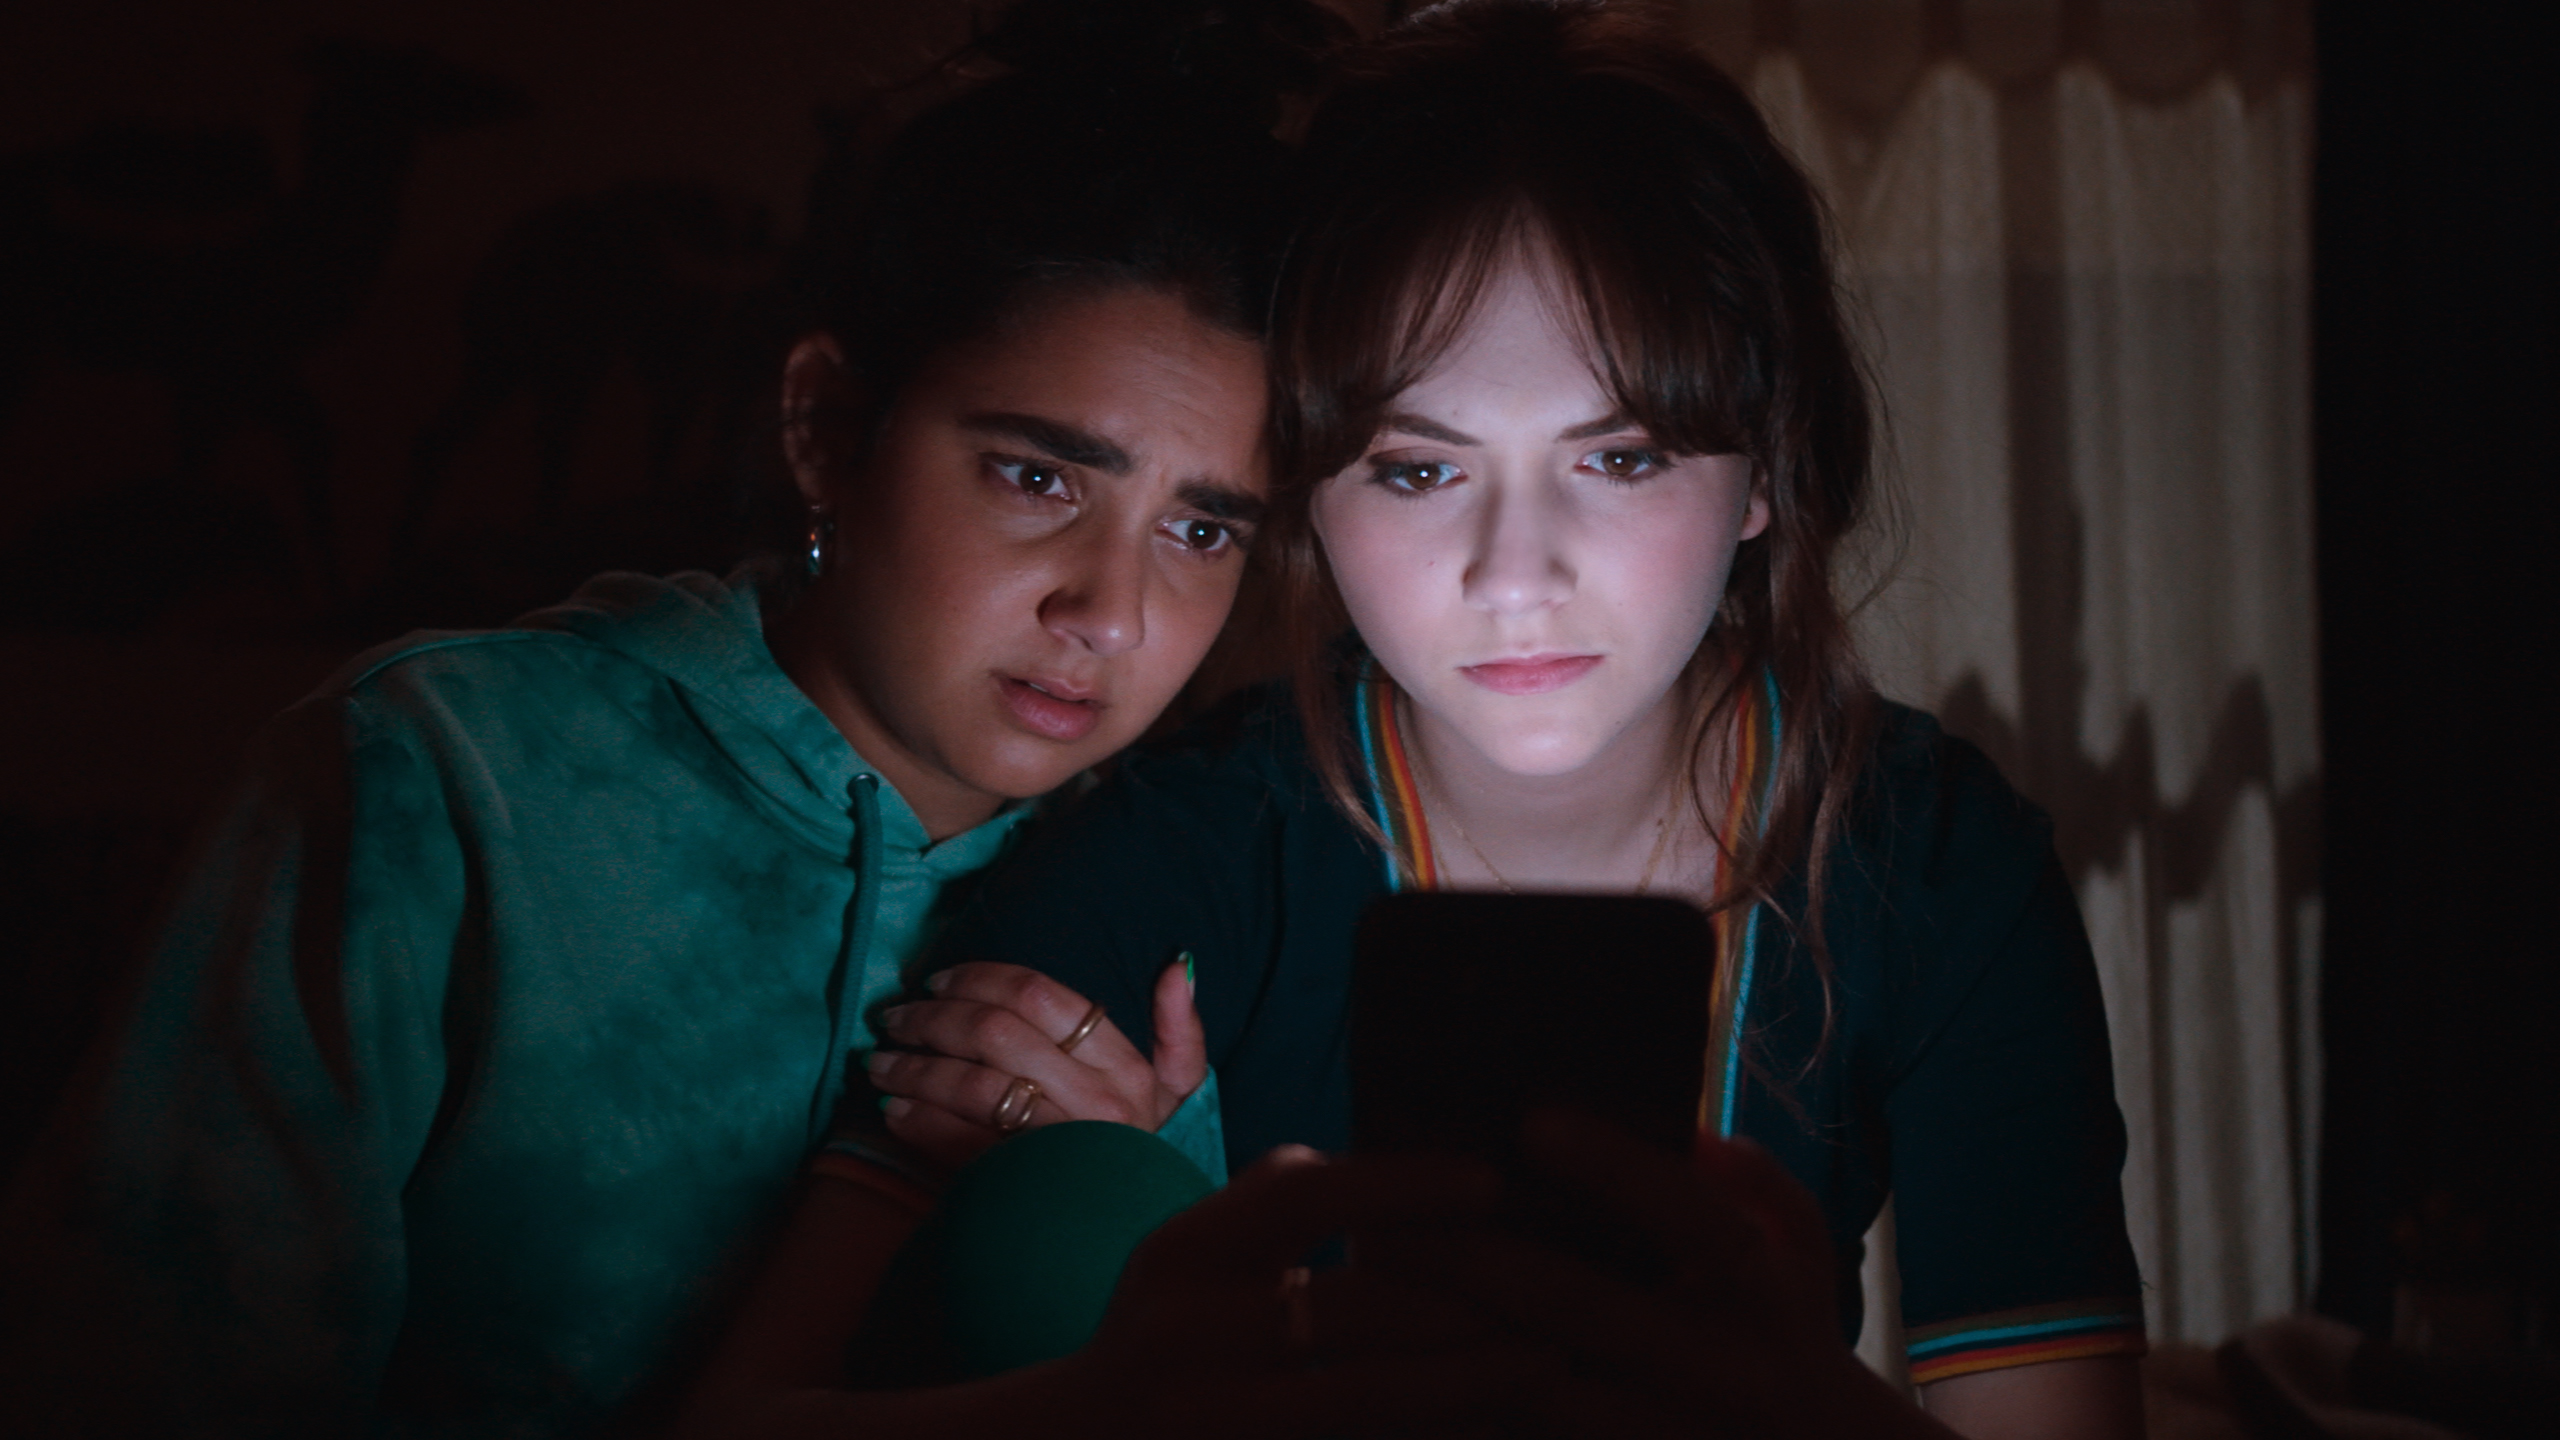 Geraldine Viswanathan and Emilia Jones appear in Cat Person by Susanna Fogel, an official selection of the Premieres program at the 2023 Sundance Film Festival. Courtesy of Sundance Institute